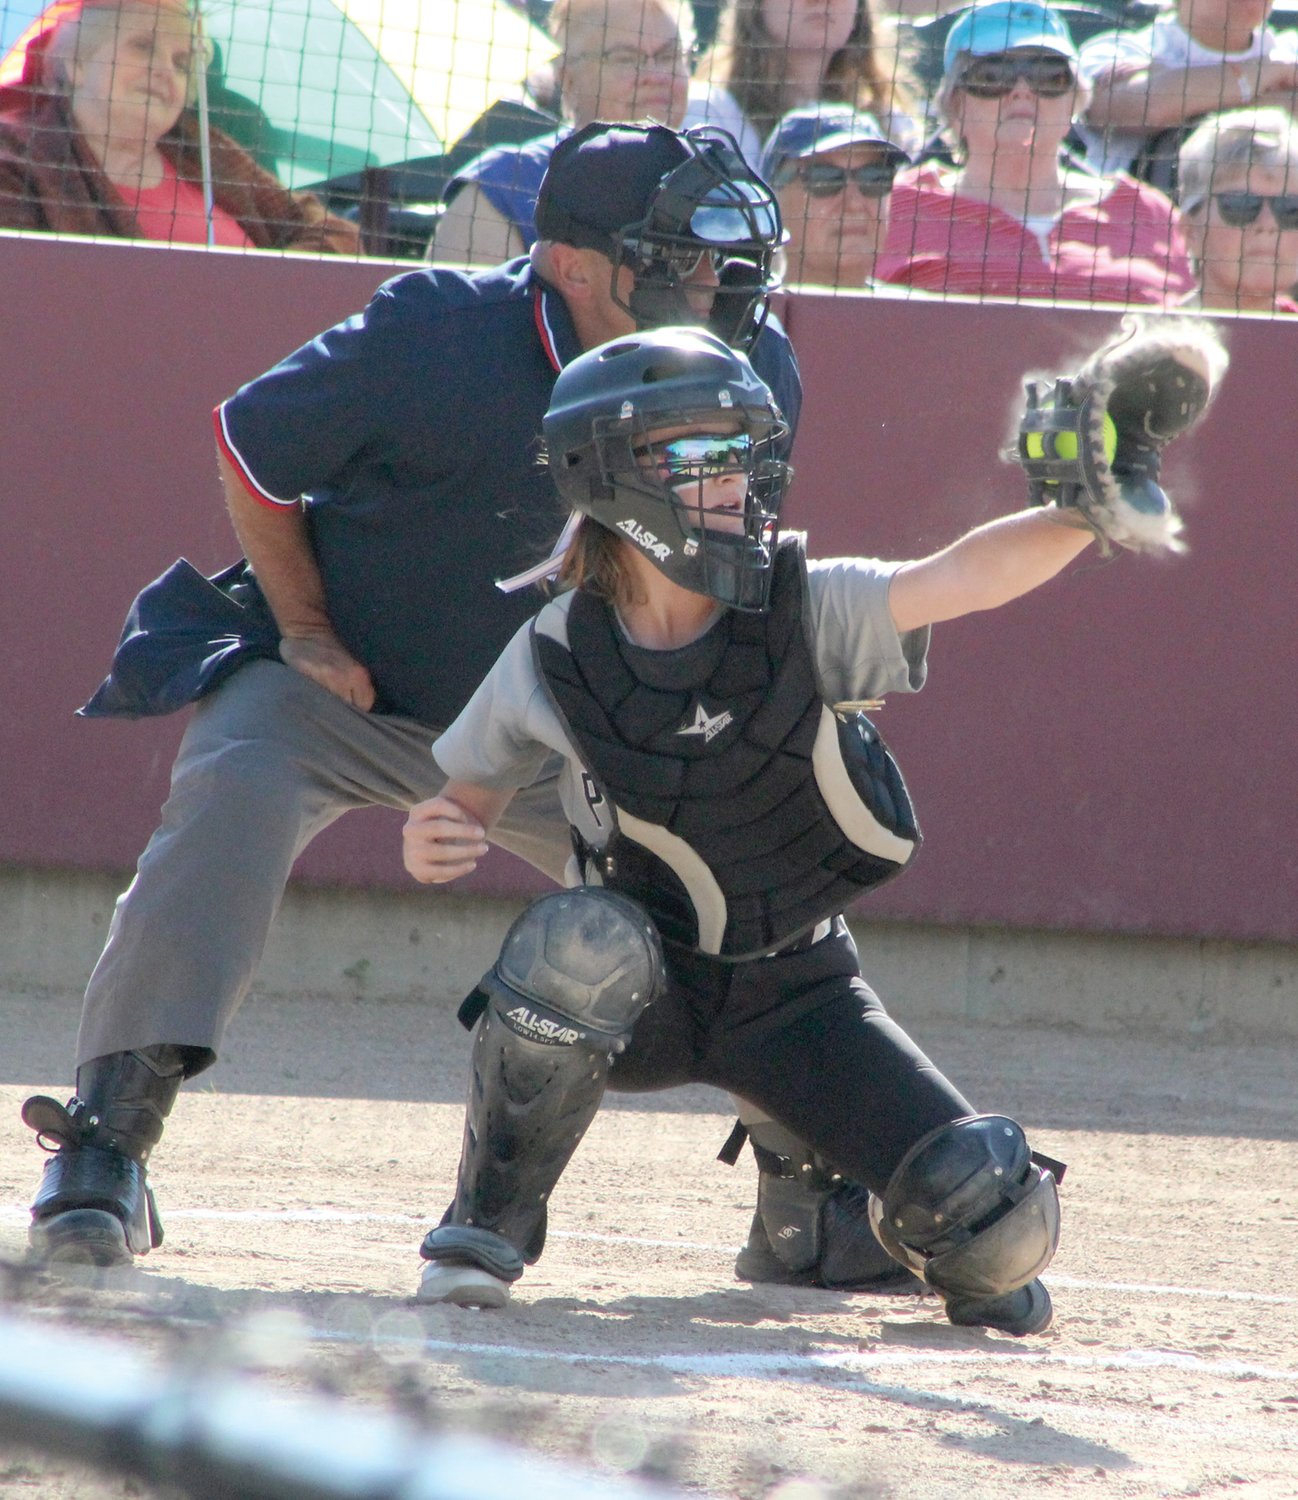 BEHIND THE PLATE: Pilgrim catcher Genna Damato backed starting pitcher Alyssa Twomey up behind the plate. (Beacon photo by Ryan D. Murray)